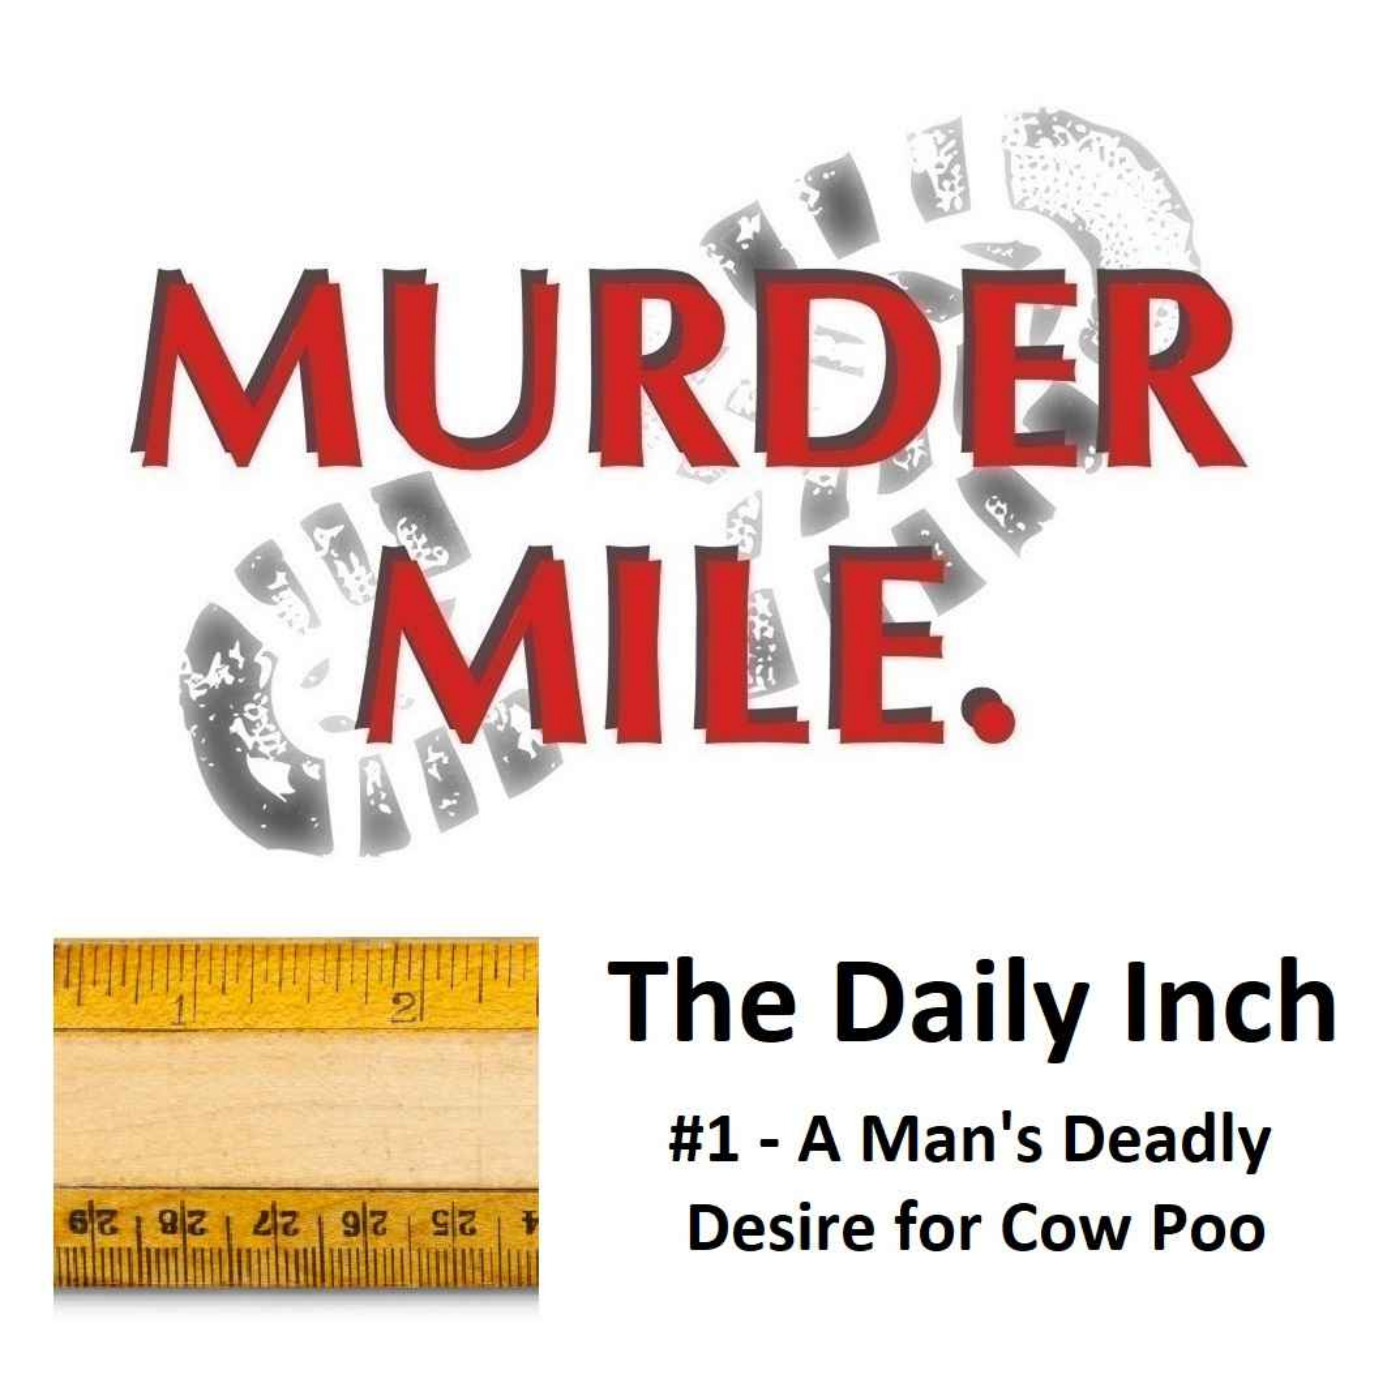 The Daily Inch #1 - 'A Man's Deadly Desire for Cow Poo'